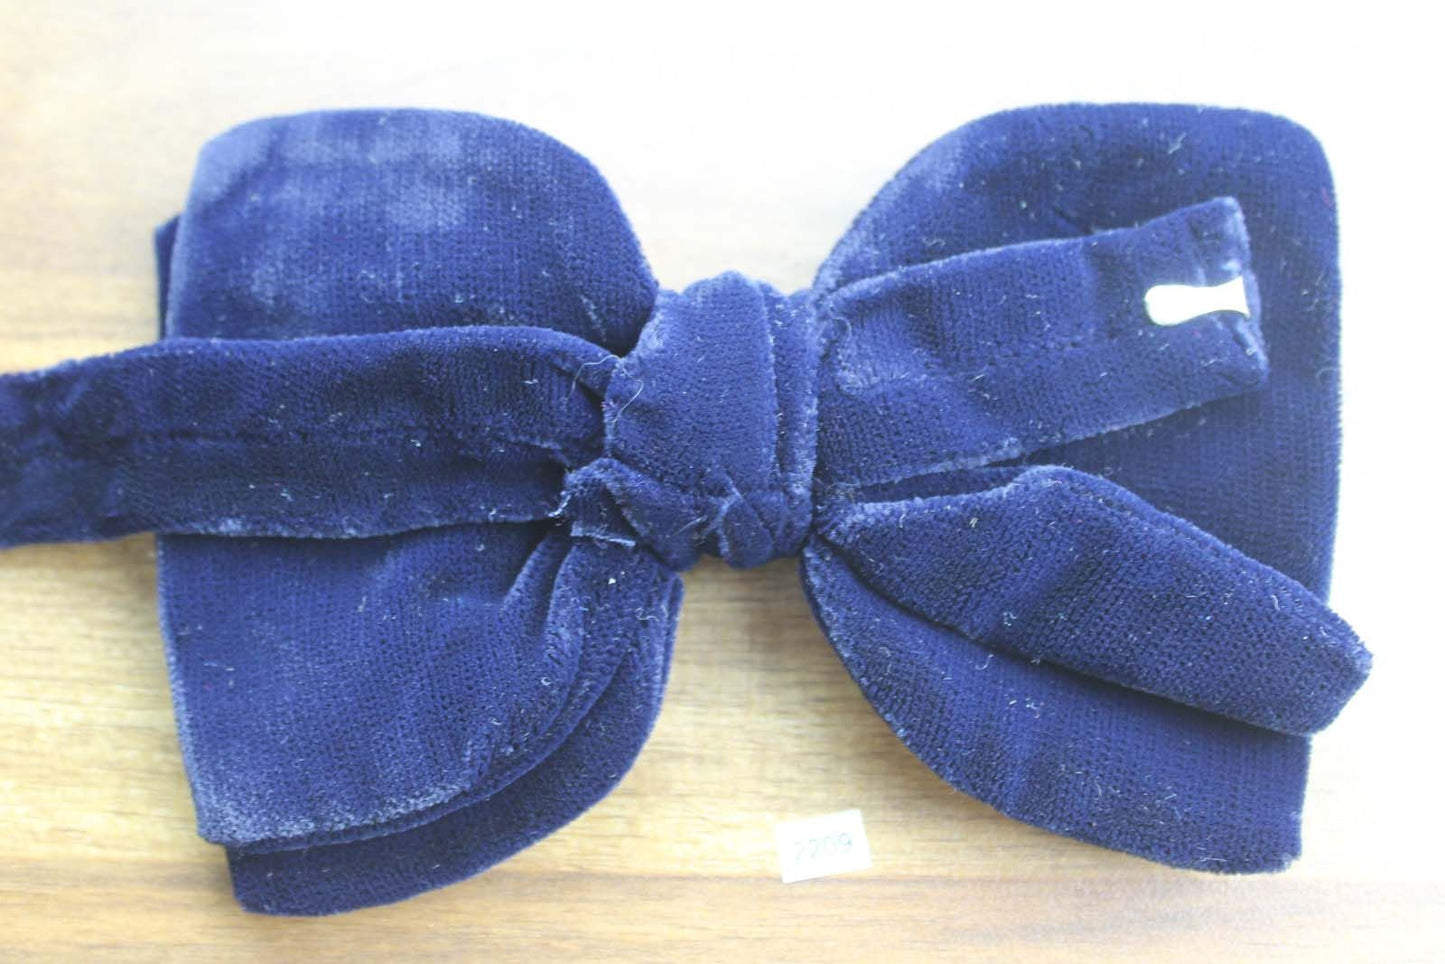 Vintage 1970s Pre Tied Bow Tie Navy Velvet Double Bow Adjustable Collar Size